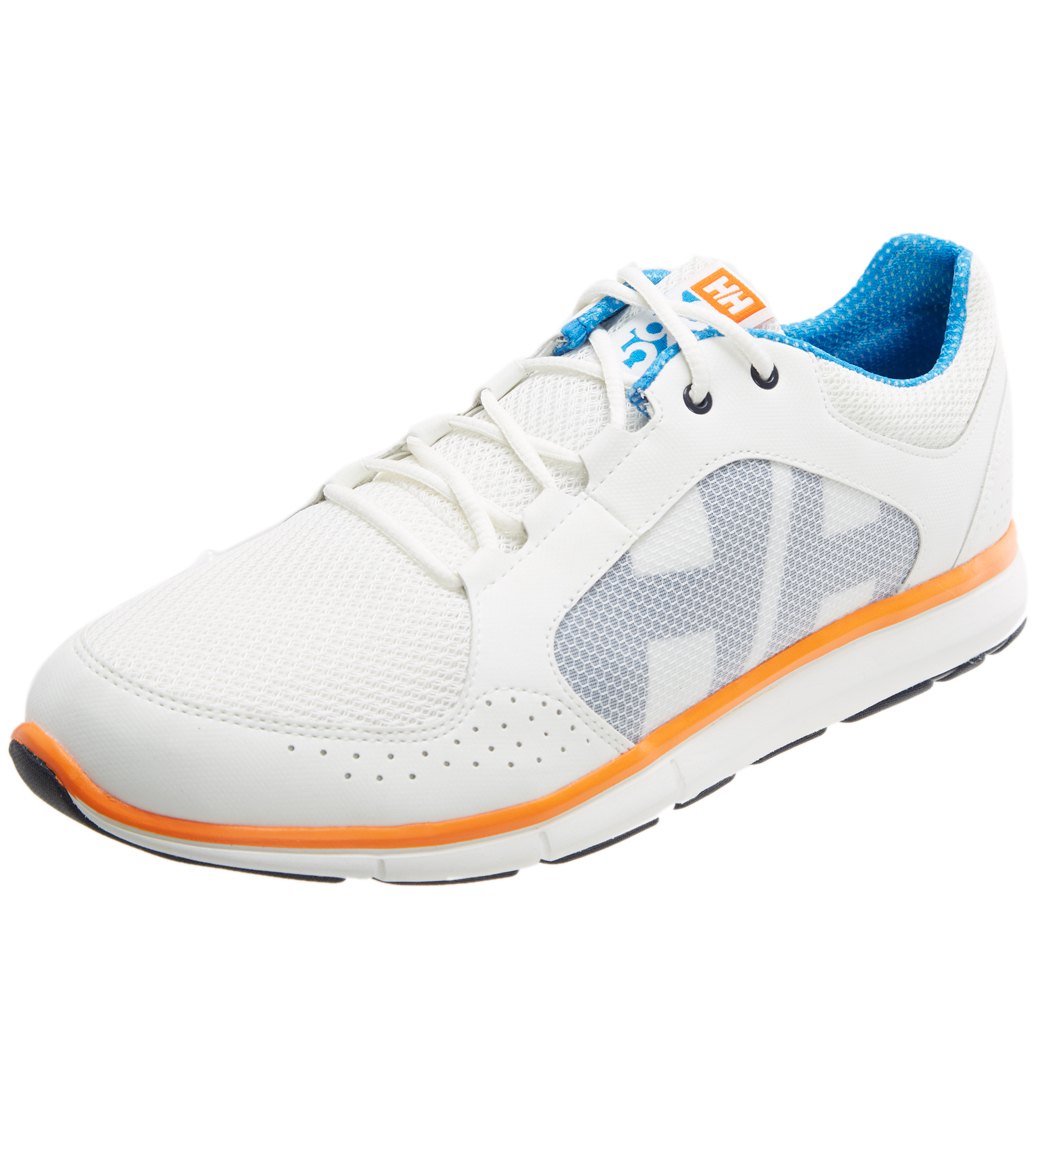 Helly Hansen Men's Ahiga V3 Hydropower Water Shoe - Off White / Racer Blue 7.5 Rubber - Swimoutlet.com